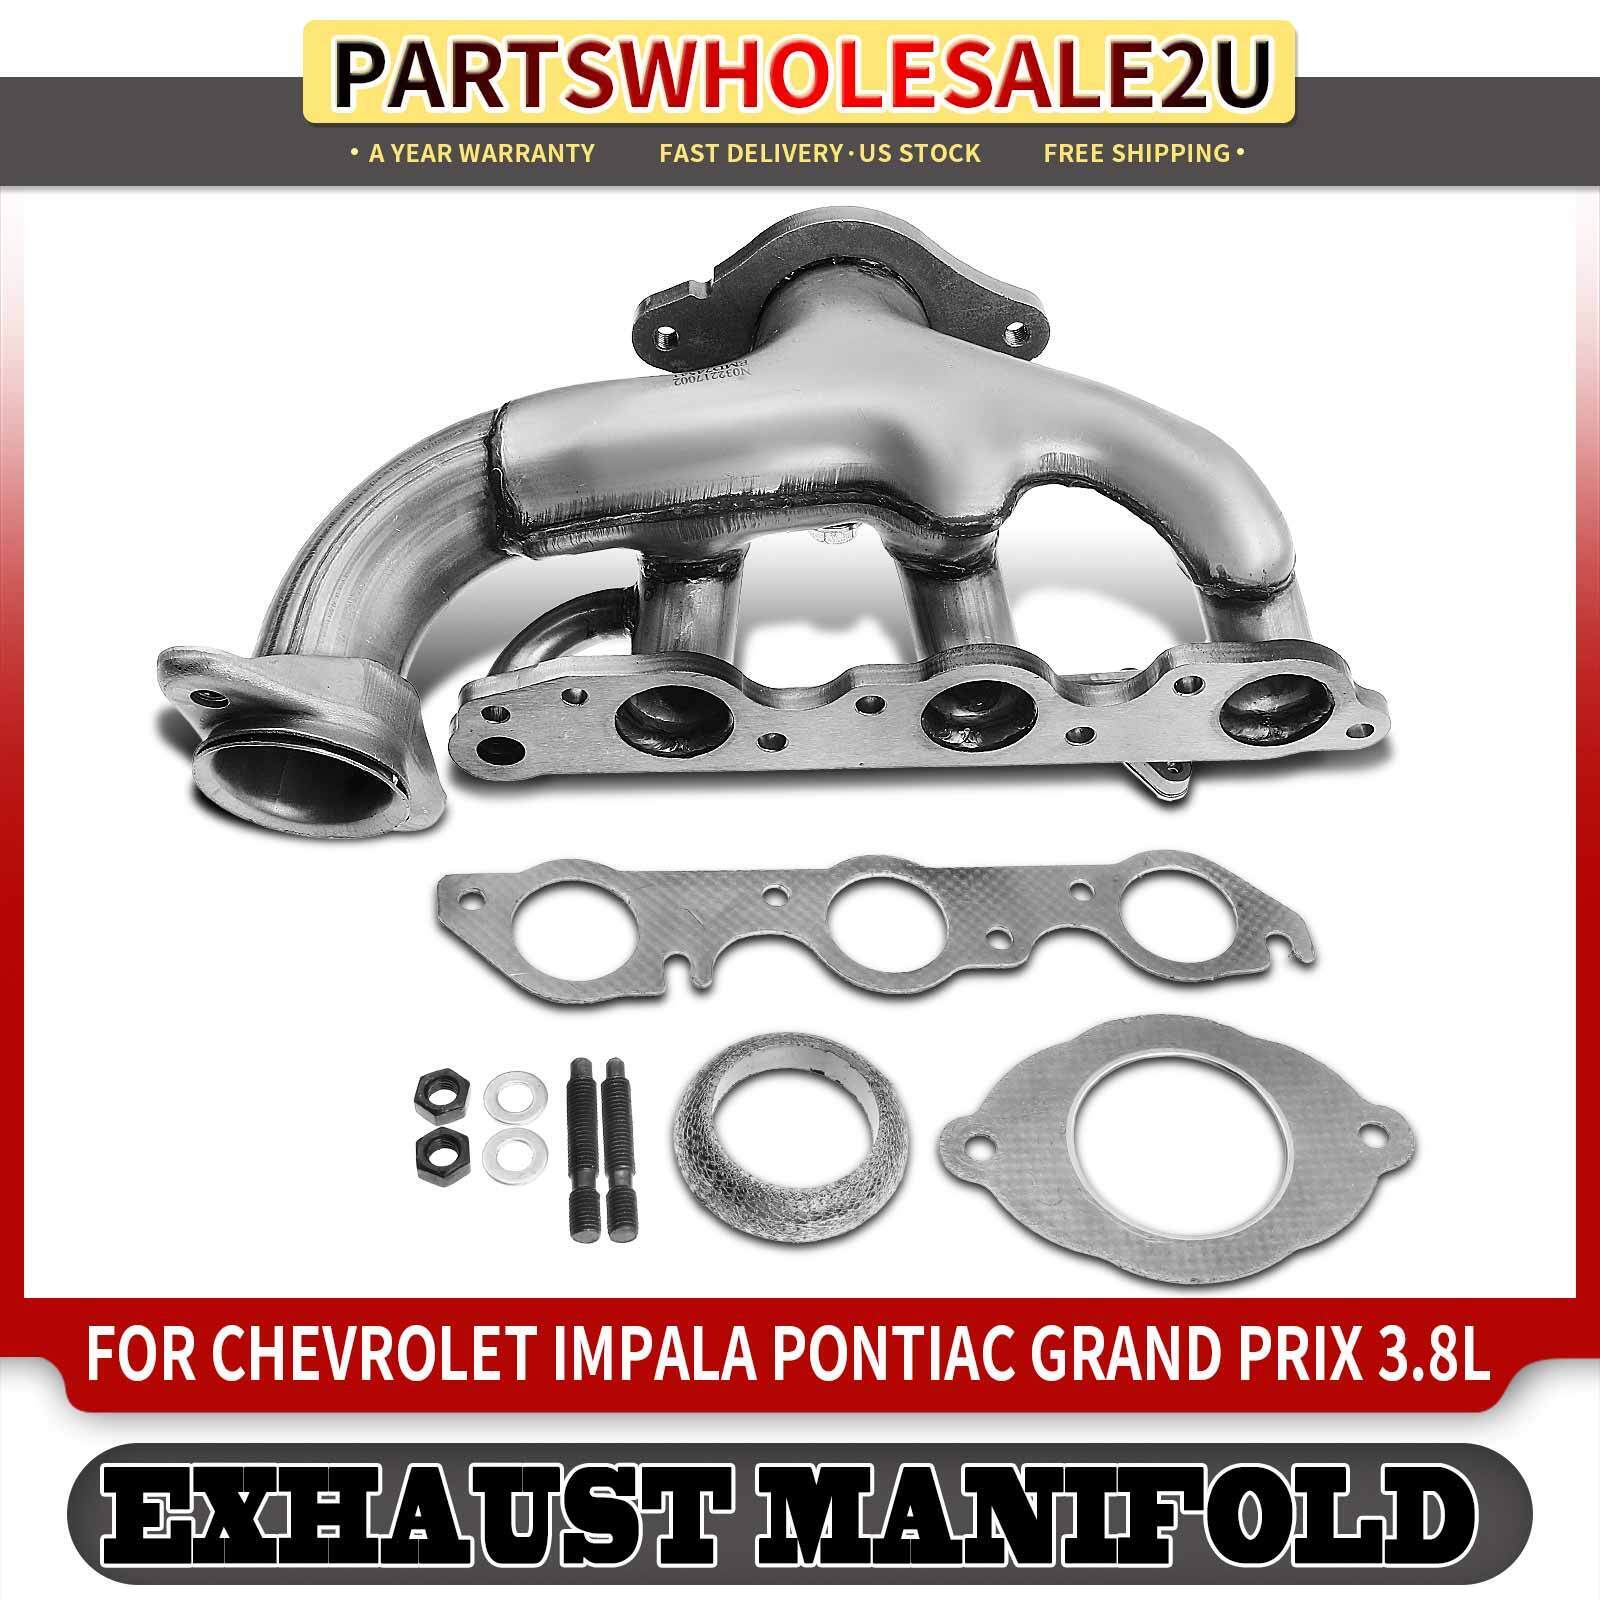 Rear Exhaust Manifold w/ Gasket Kit for Chevy Impala Oldsmobile Intrigue 3.8L